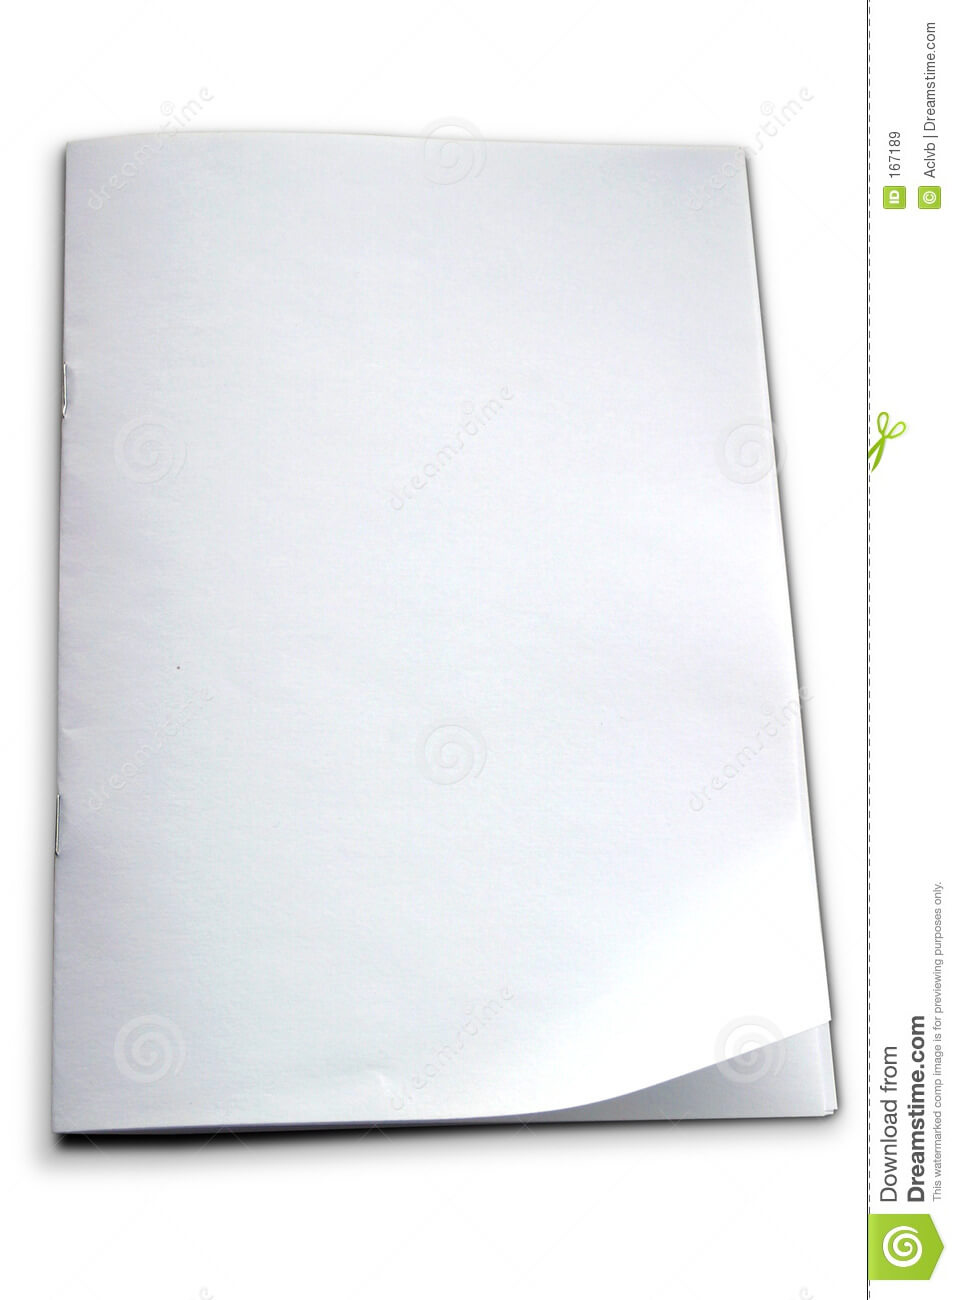 White Booklet Template Stock Image. Image Of Booklet, Book Throughout Blank Magazine Template Psd